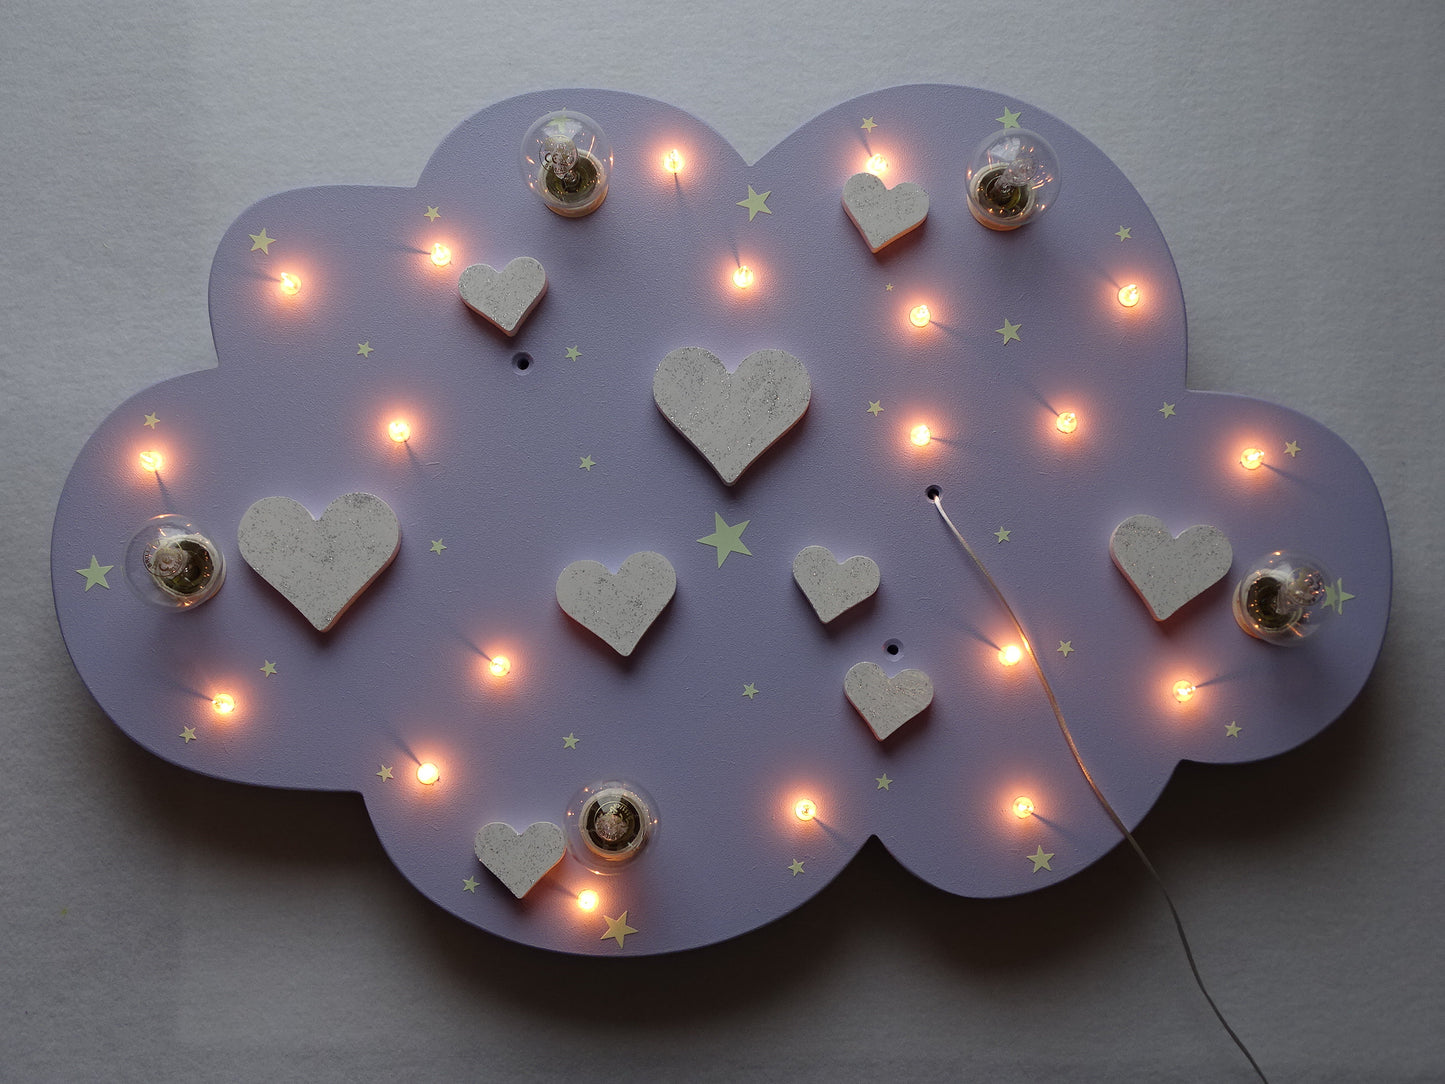 LED ceiling light "WHITE HEARTS" - with GLITTER!